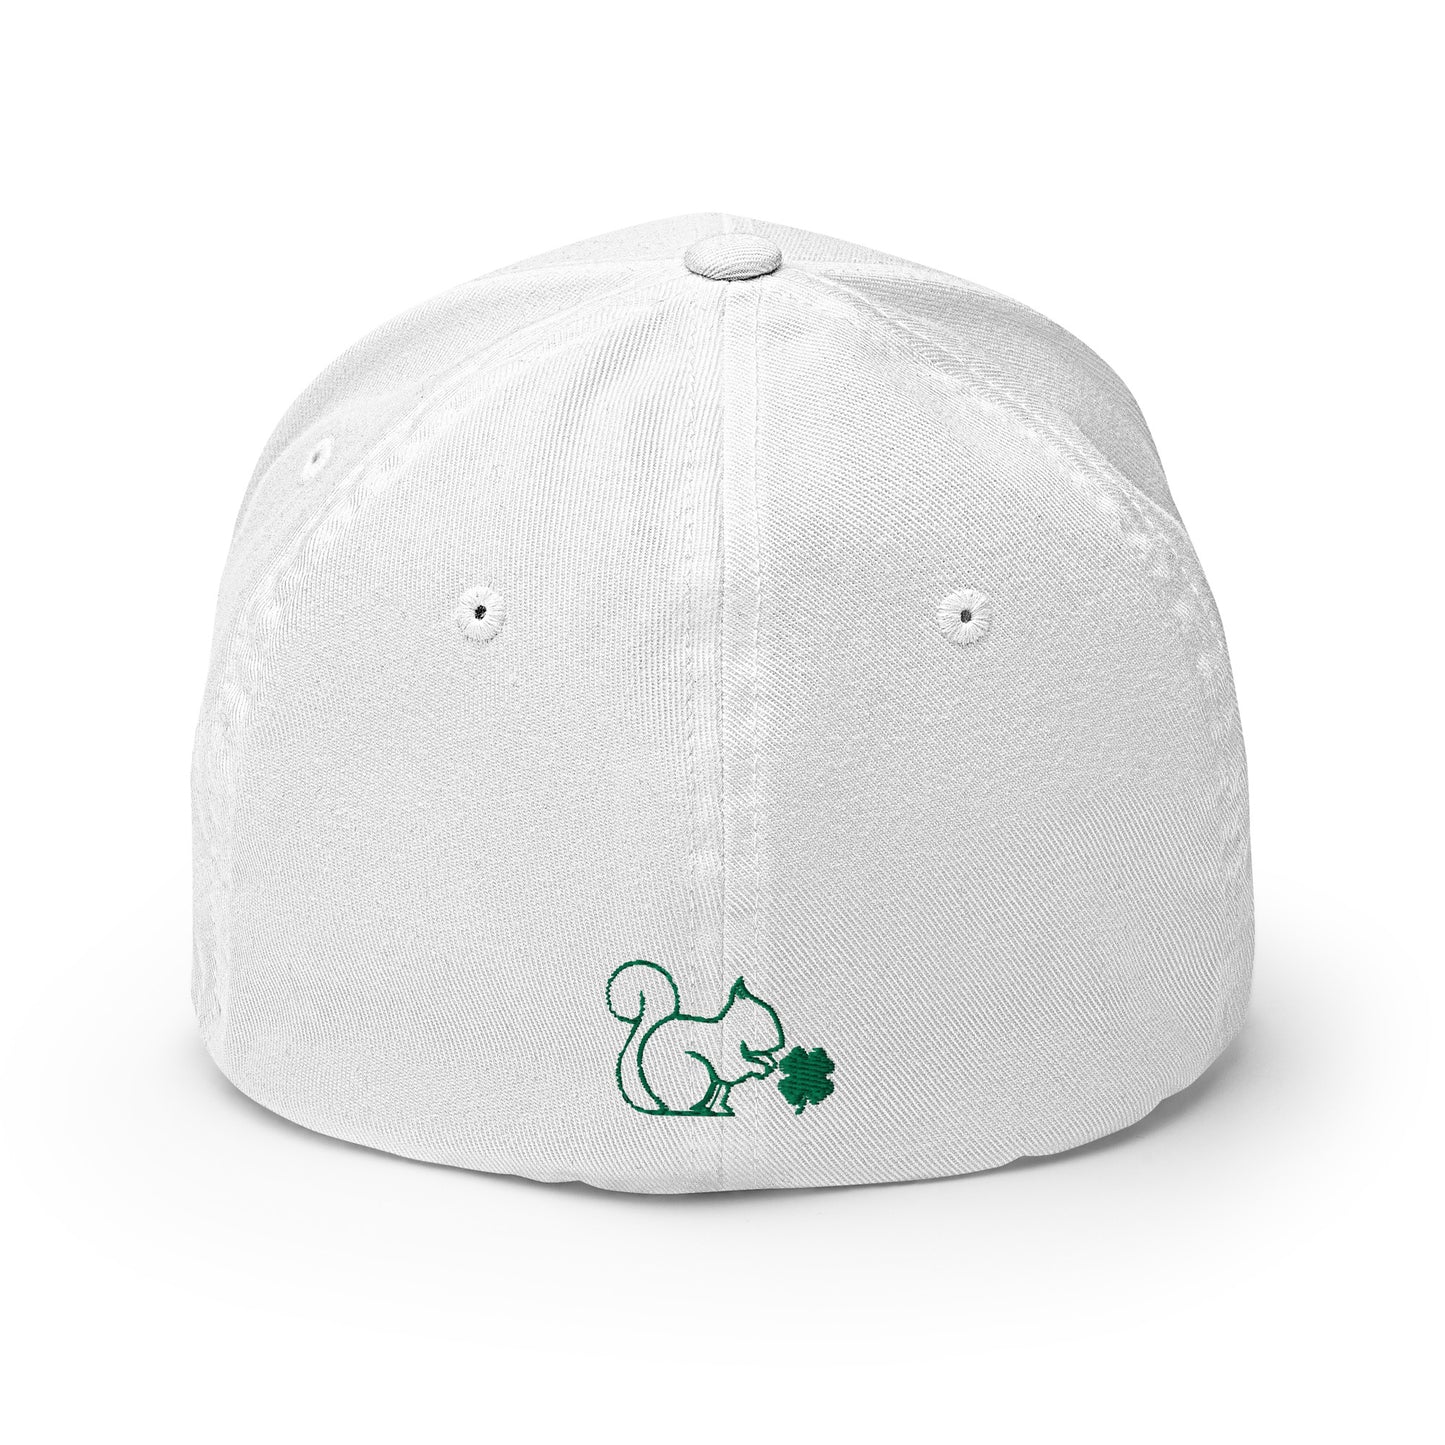 Caddy Couture Structured Twill Cap - St. Patty's Day